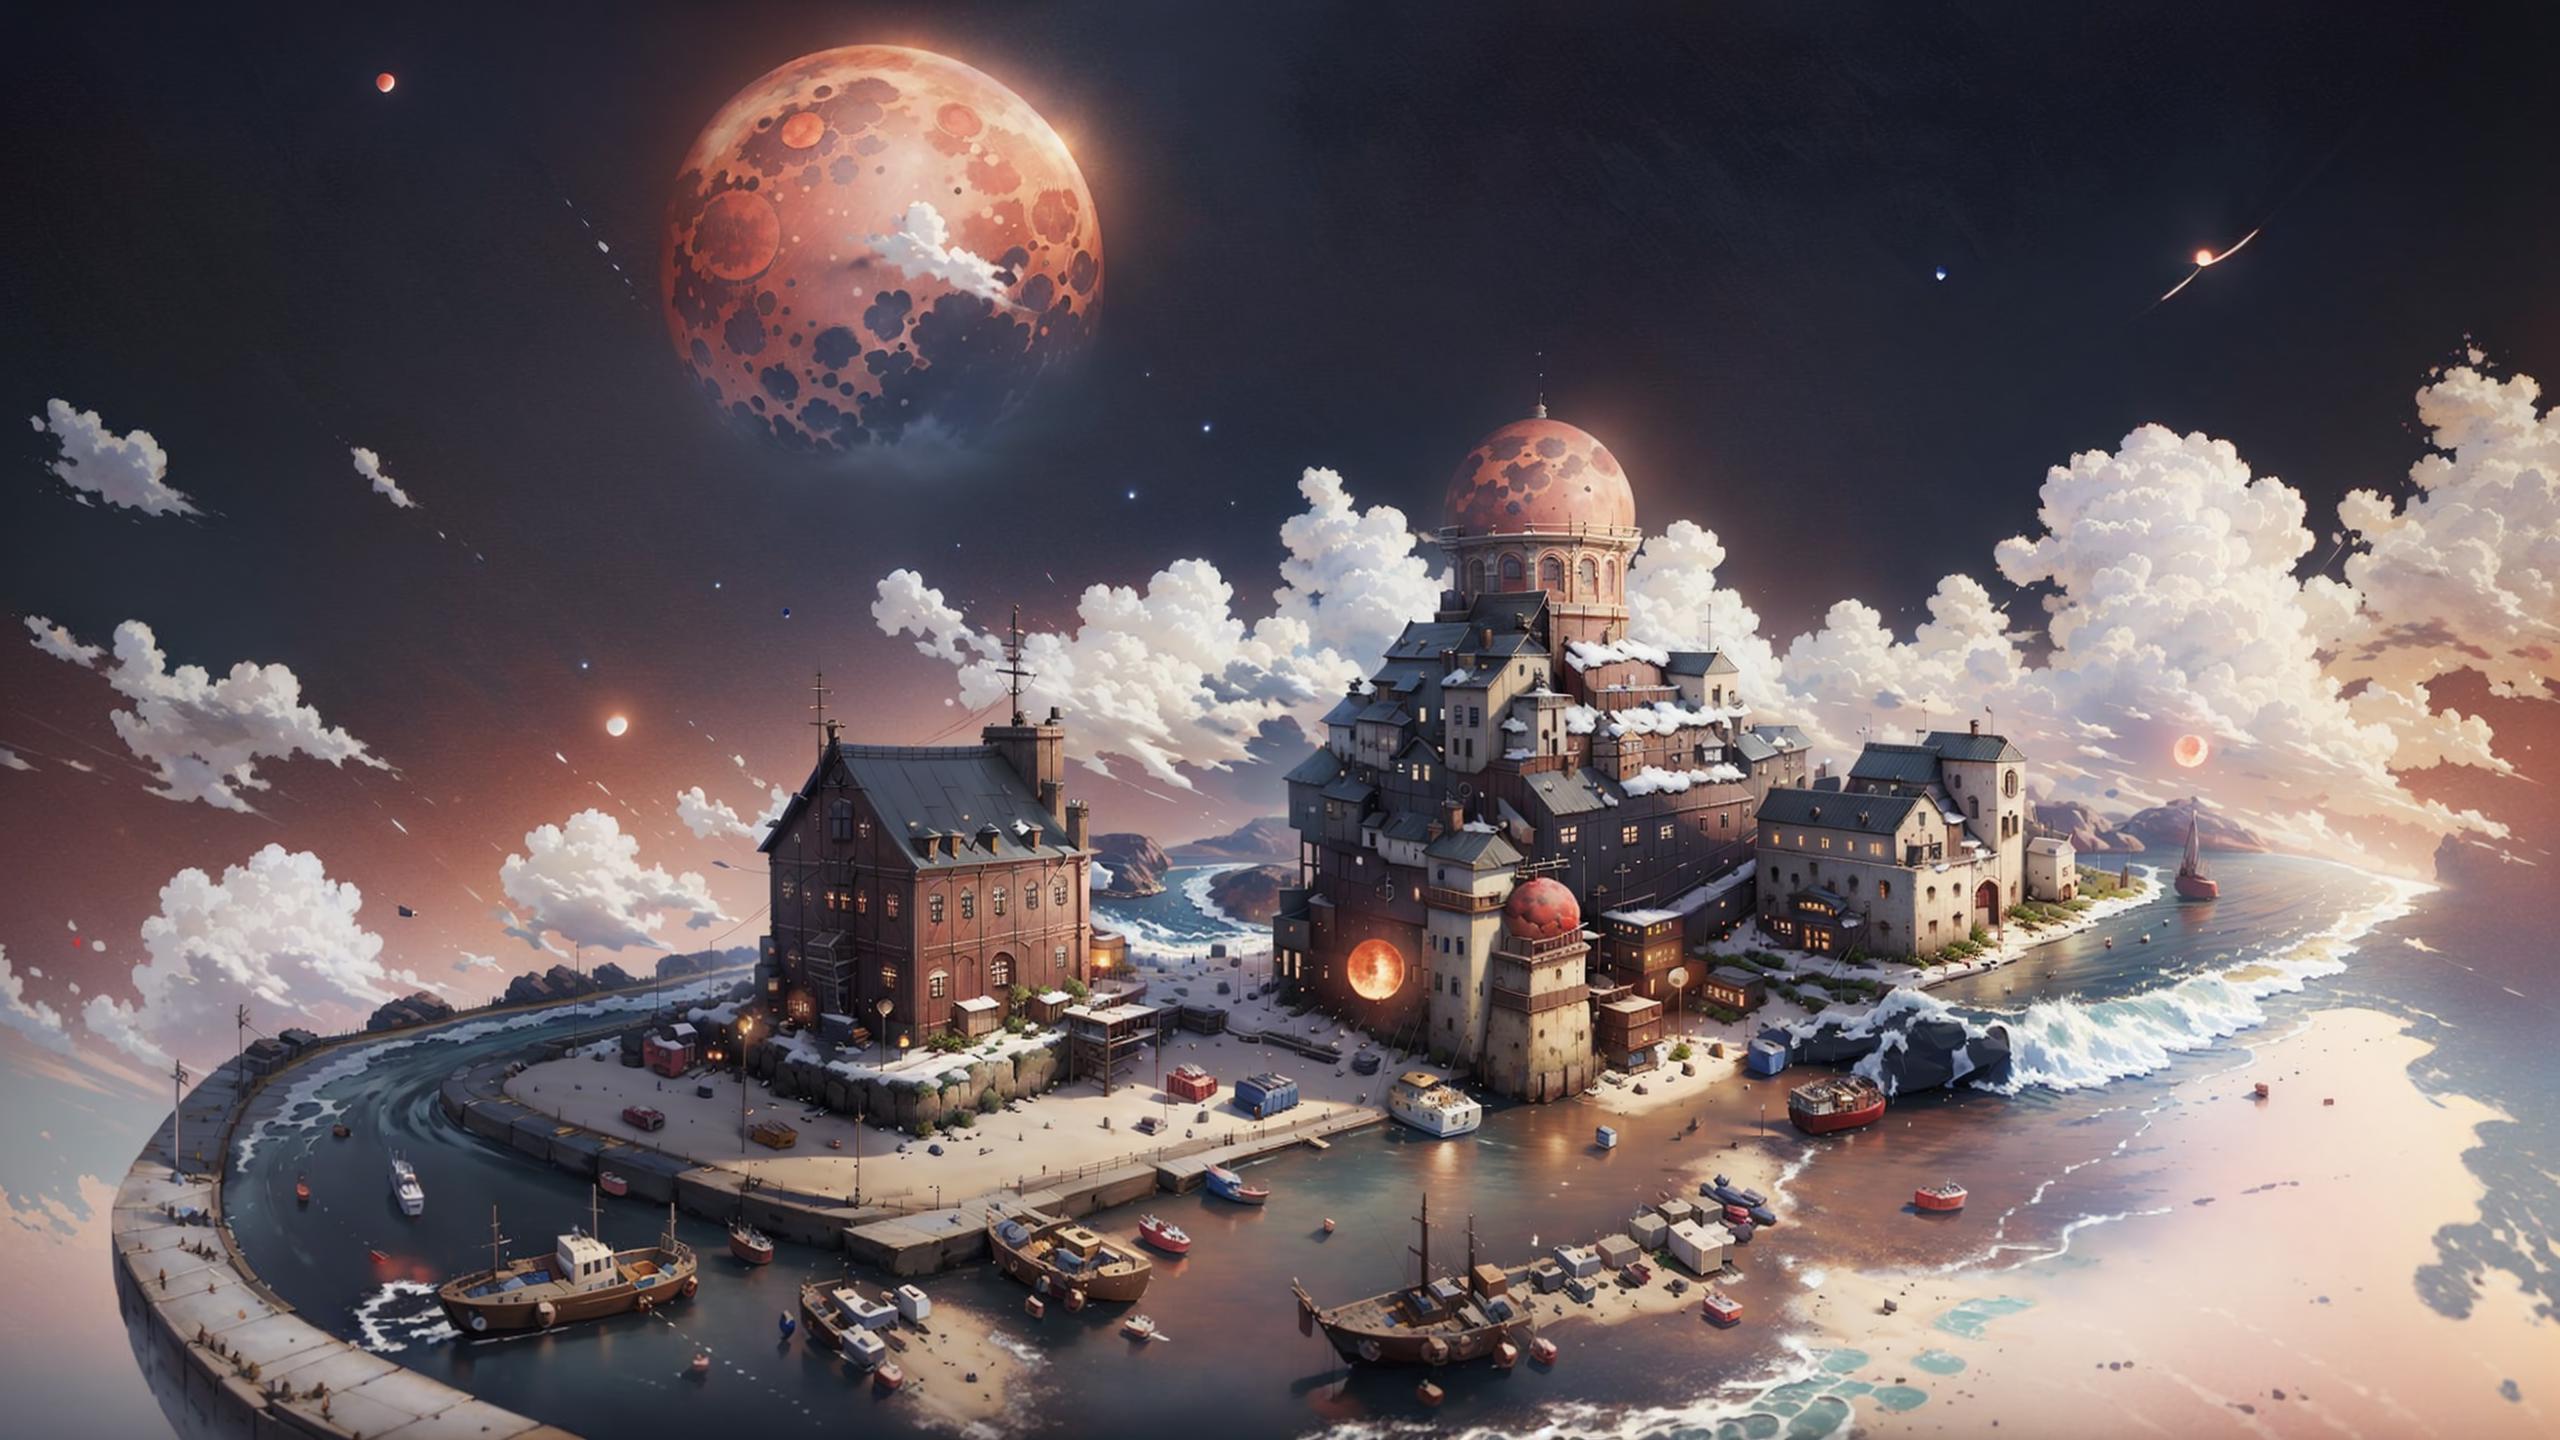 An Artistic Fantasy Painting of a Town with Boats, Cars, and a Moon in the Sky